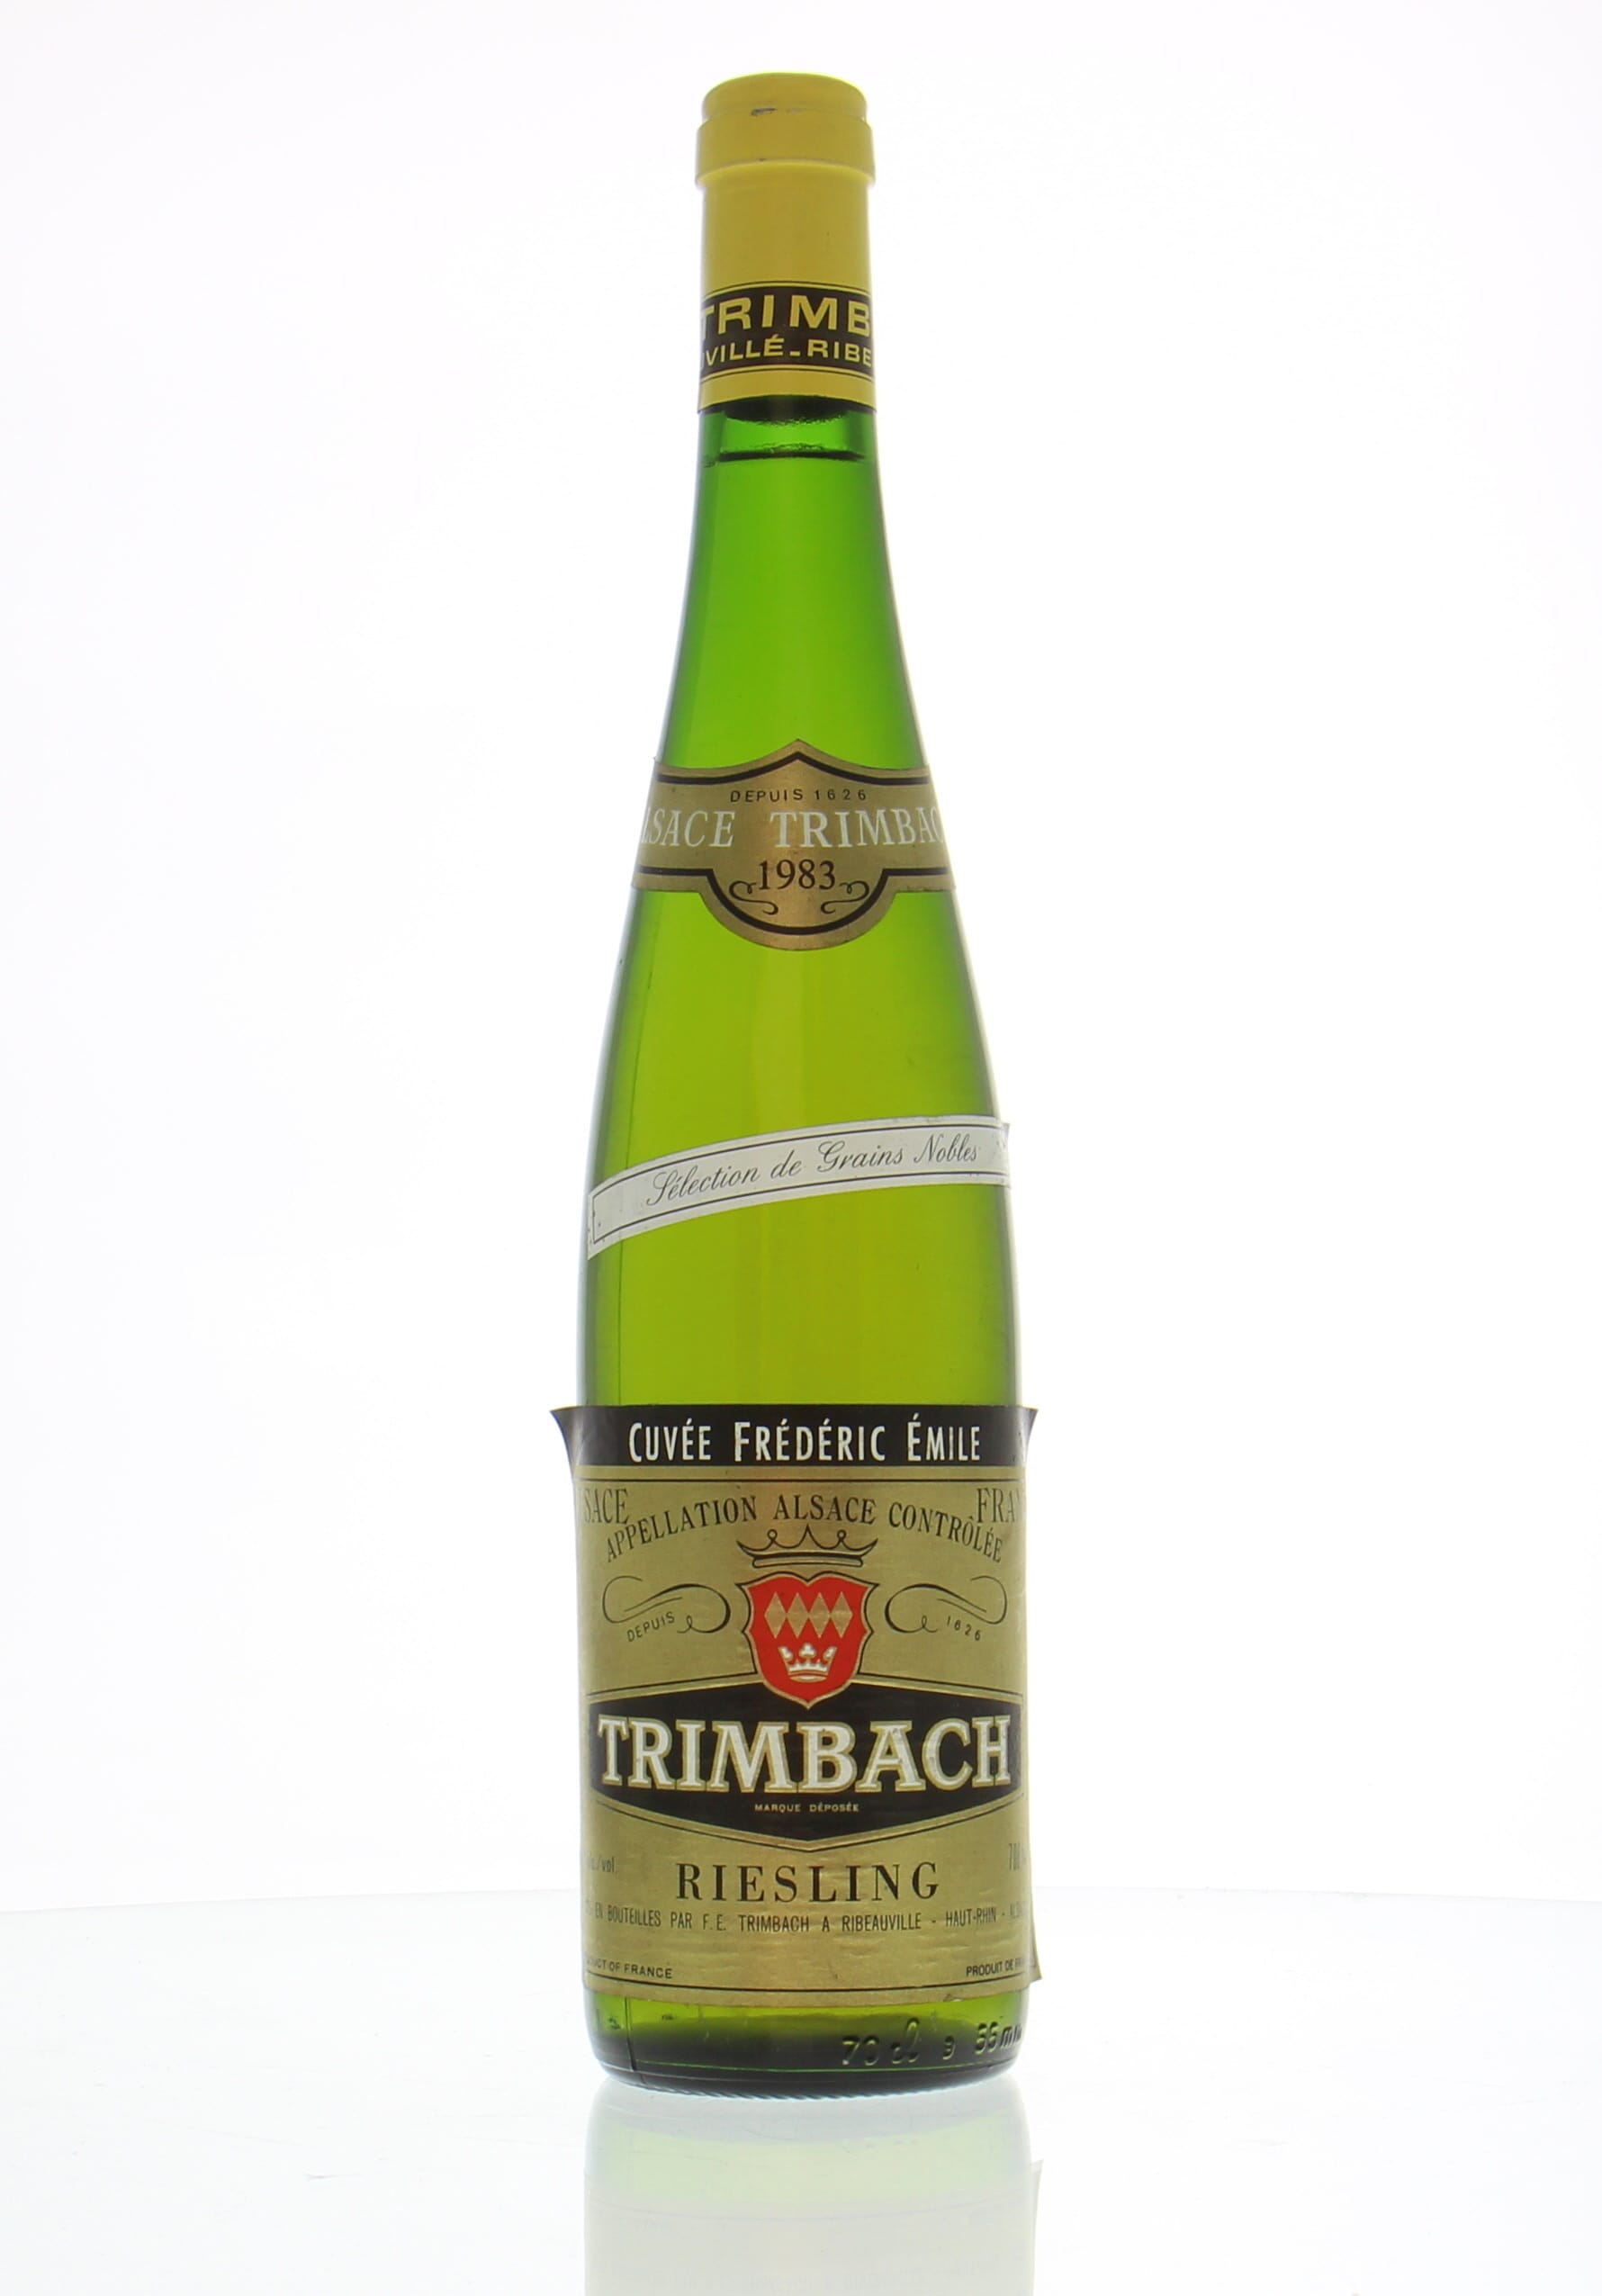 Trimbach - Riesling Cuvee Frederic Emile Selection Grains Nobles 1983 Perfect